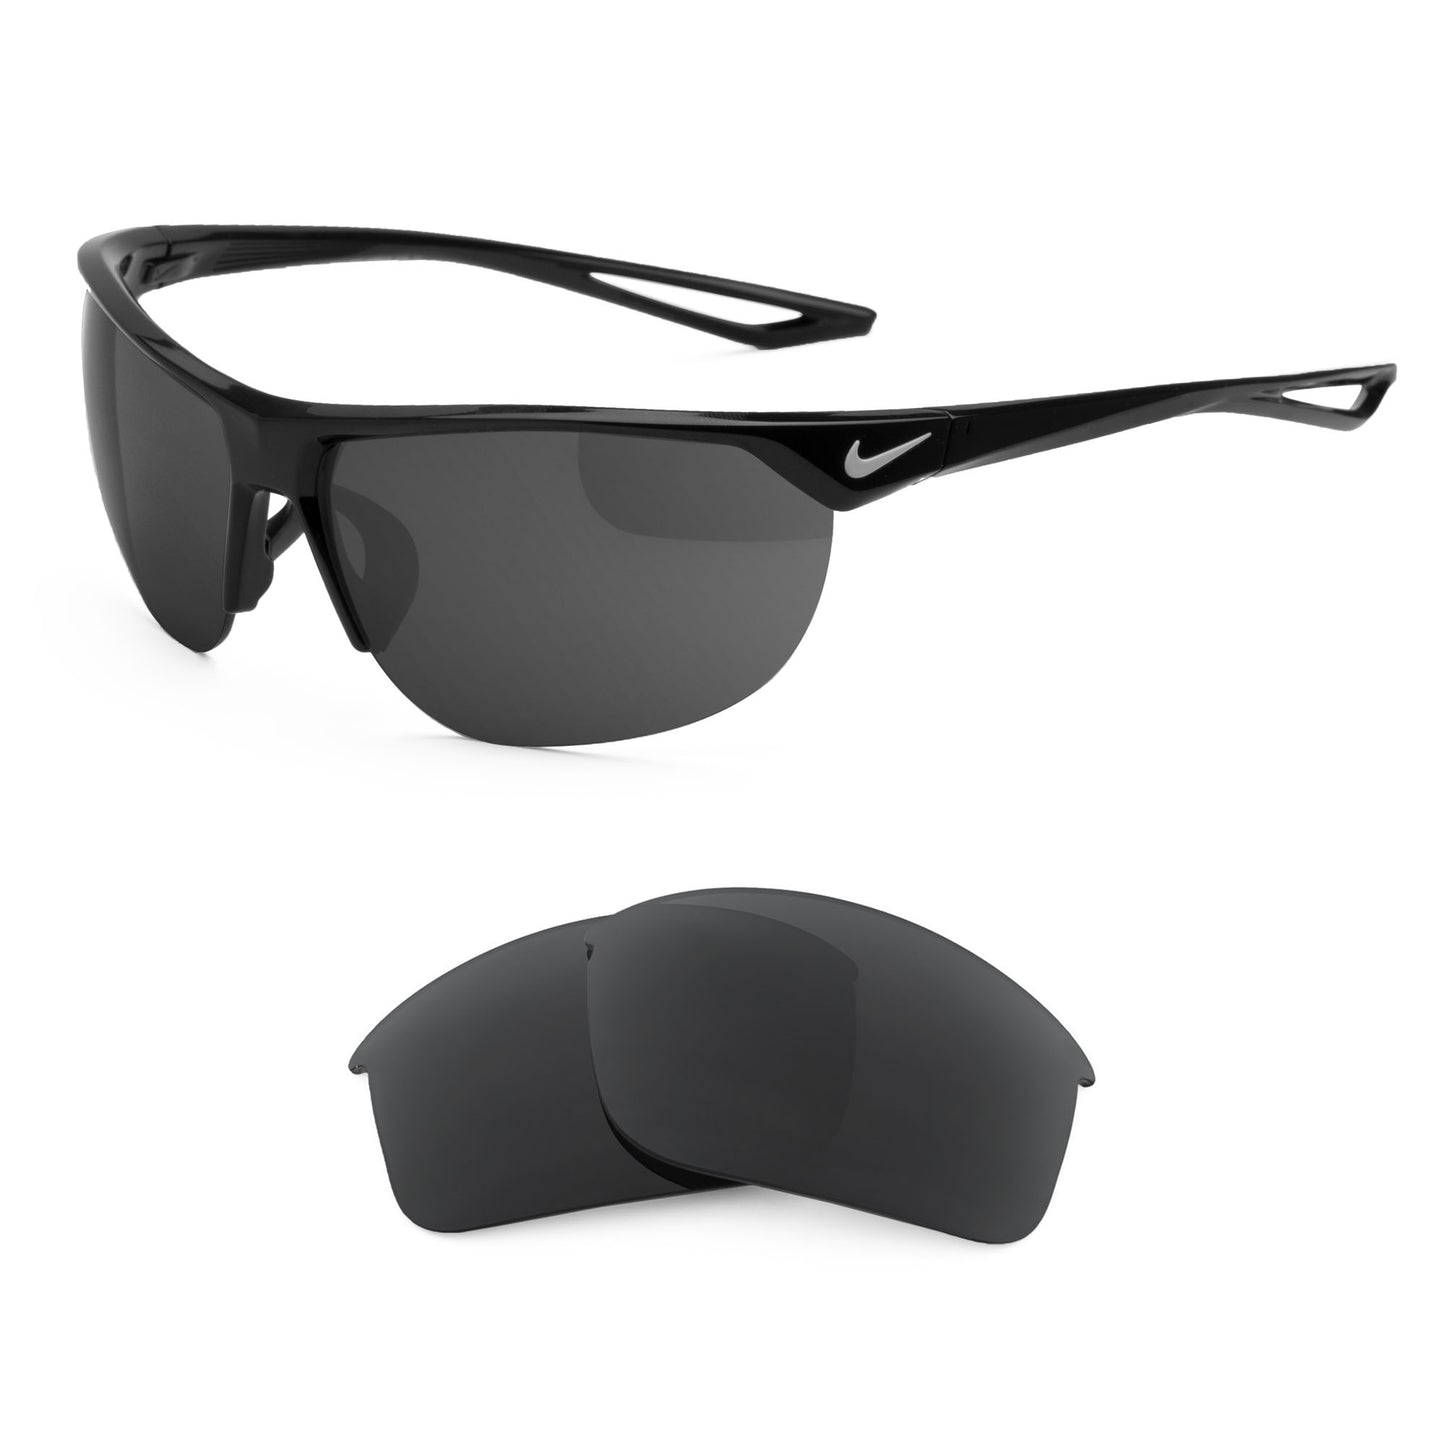 Nike Cross Trainer sunglasses with replacement lenses